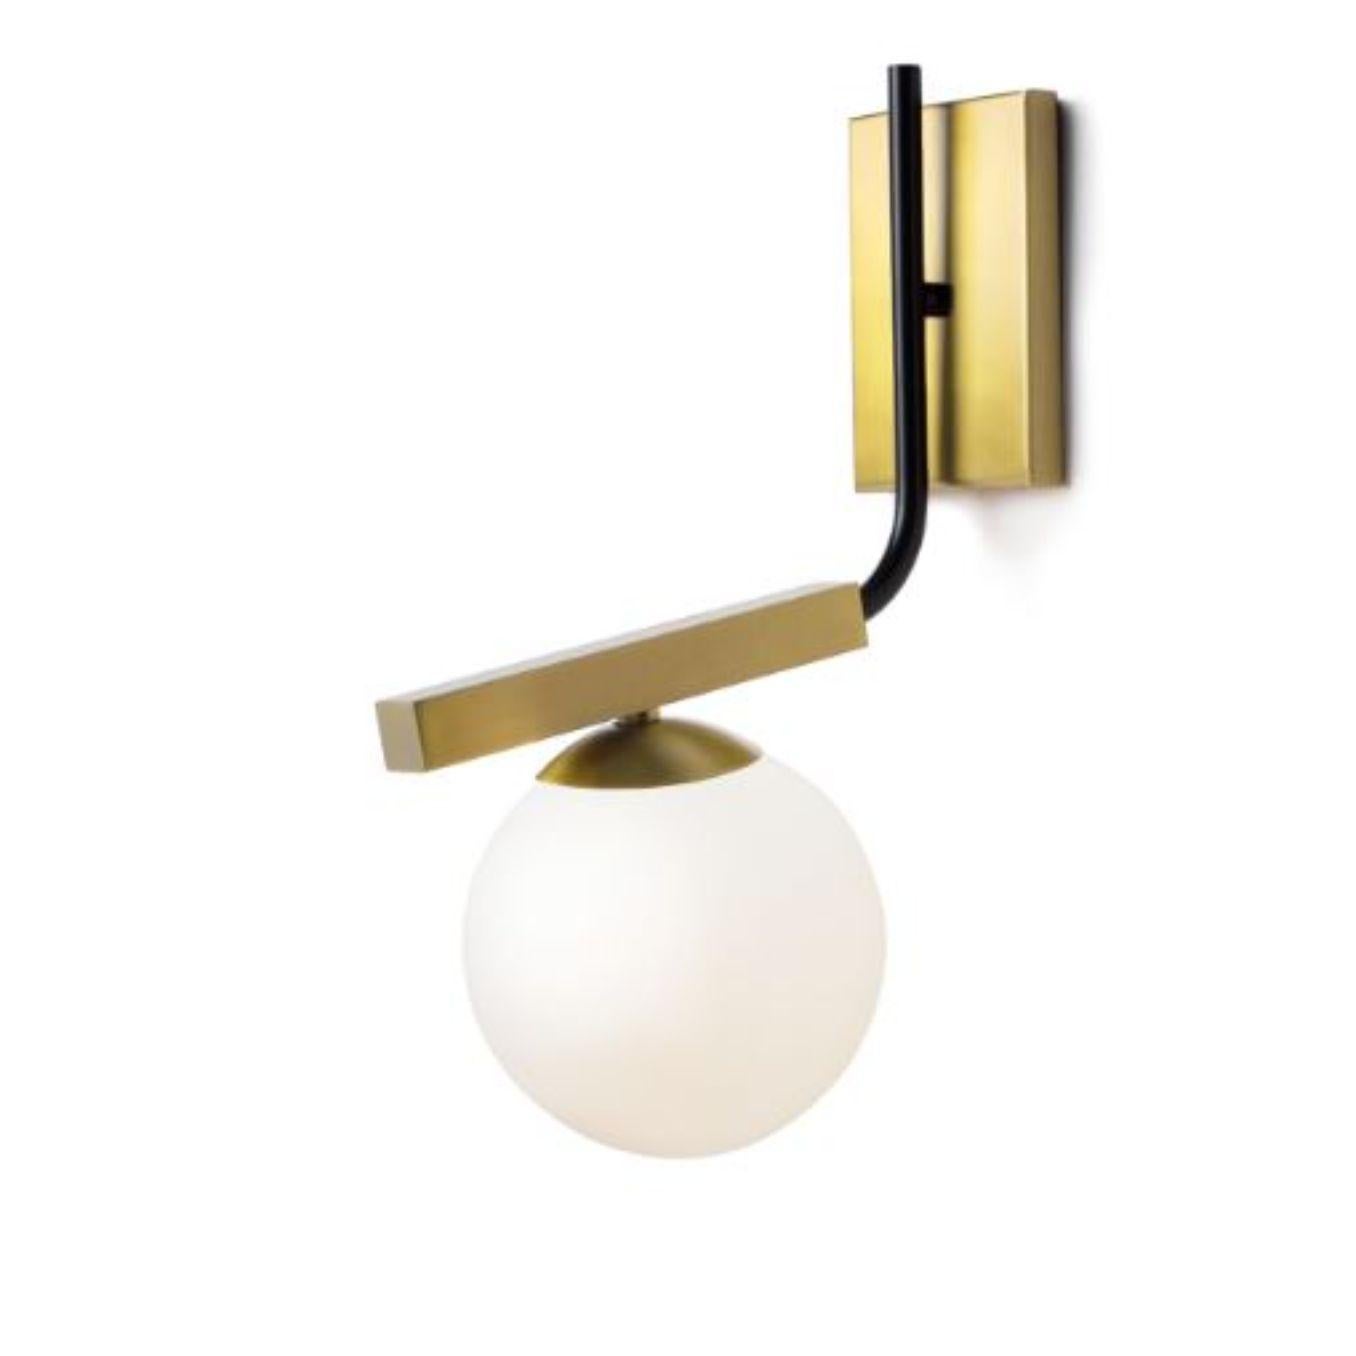 Brass globe wall lamp by Dooq
Dimensions: W 15 x D 26 x H 40 cm
Materials: lacquered metal, polished or brushed metal, brass.
Also available in different colours and materials.

Information:
230V/50Hz
1 x max. G9
4W LED

120V/60Hz
1 x max. G9
4W